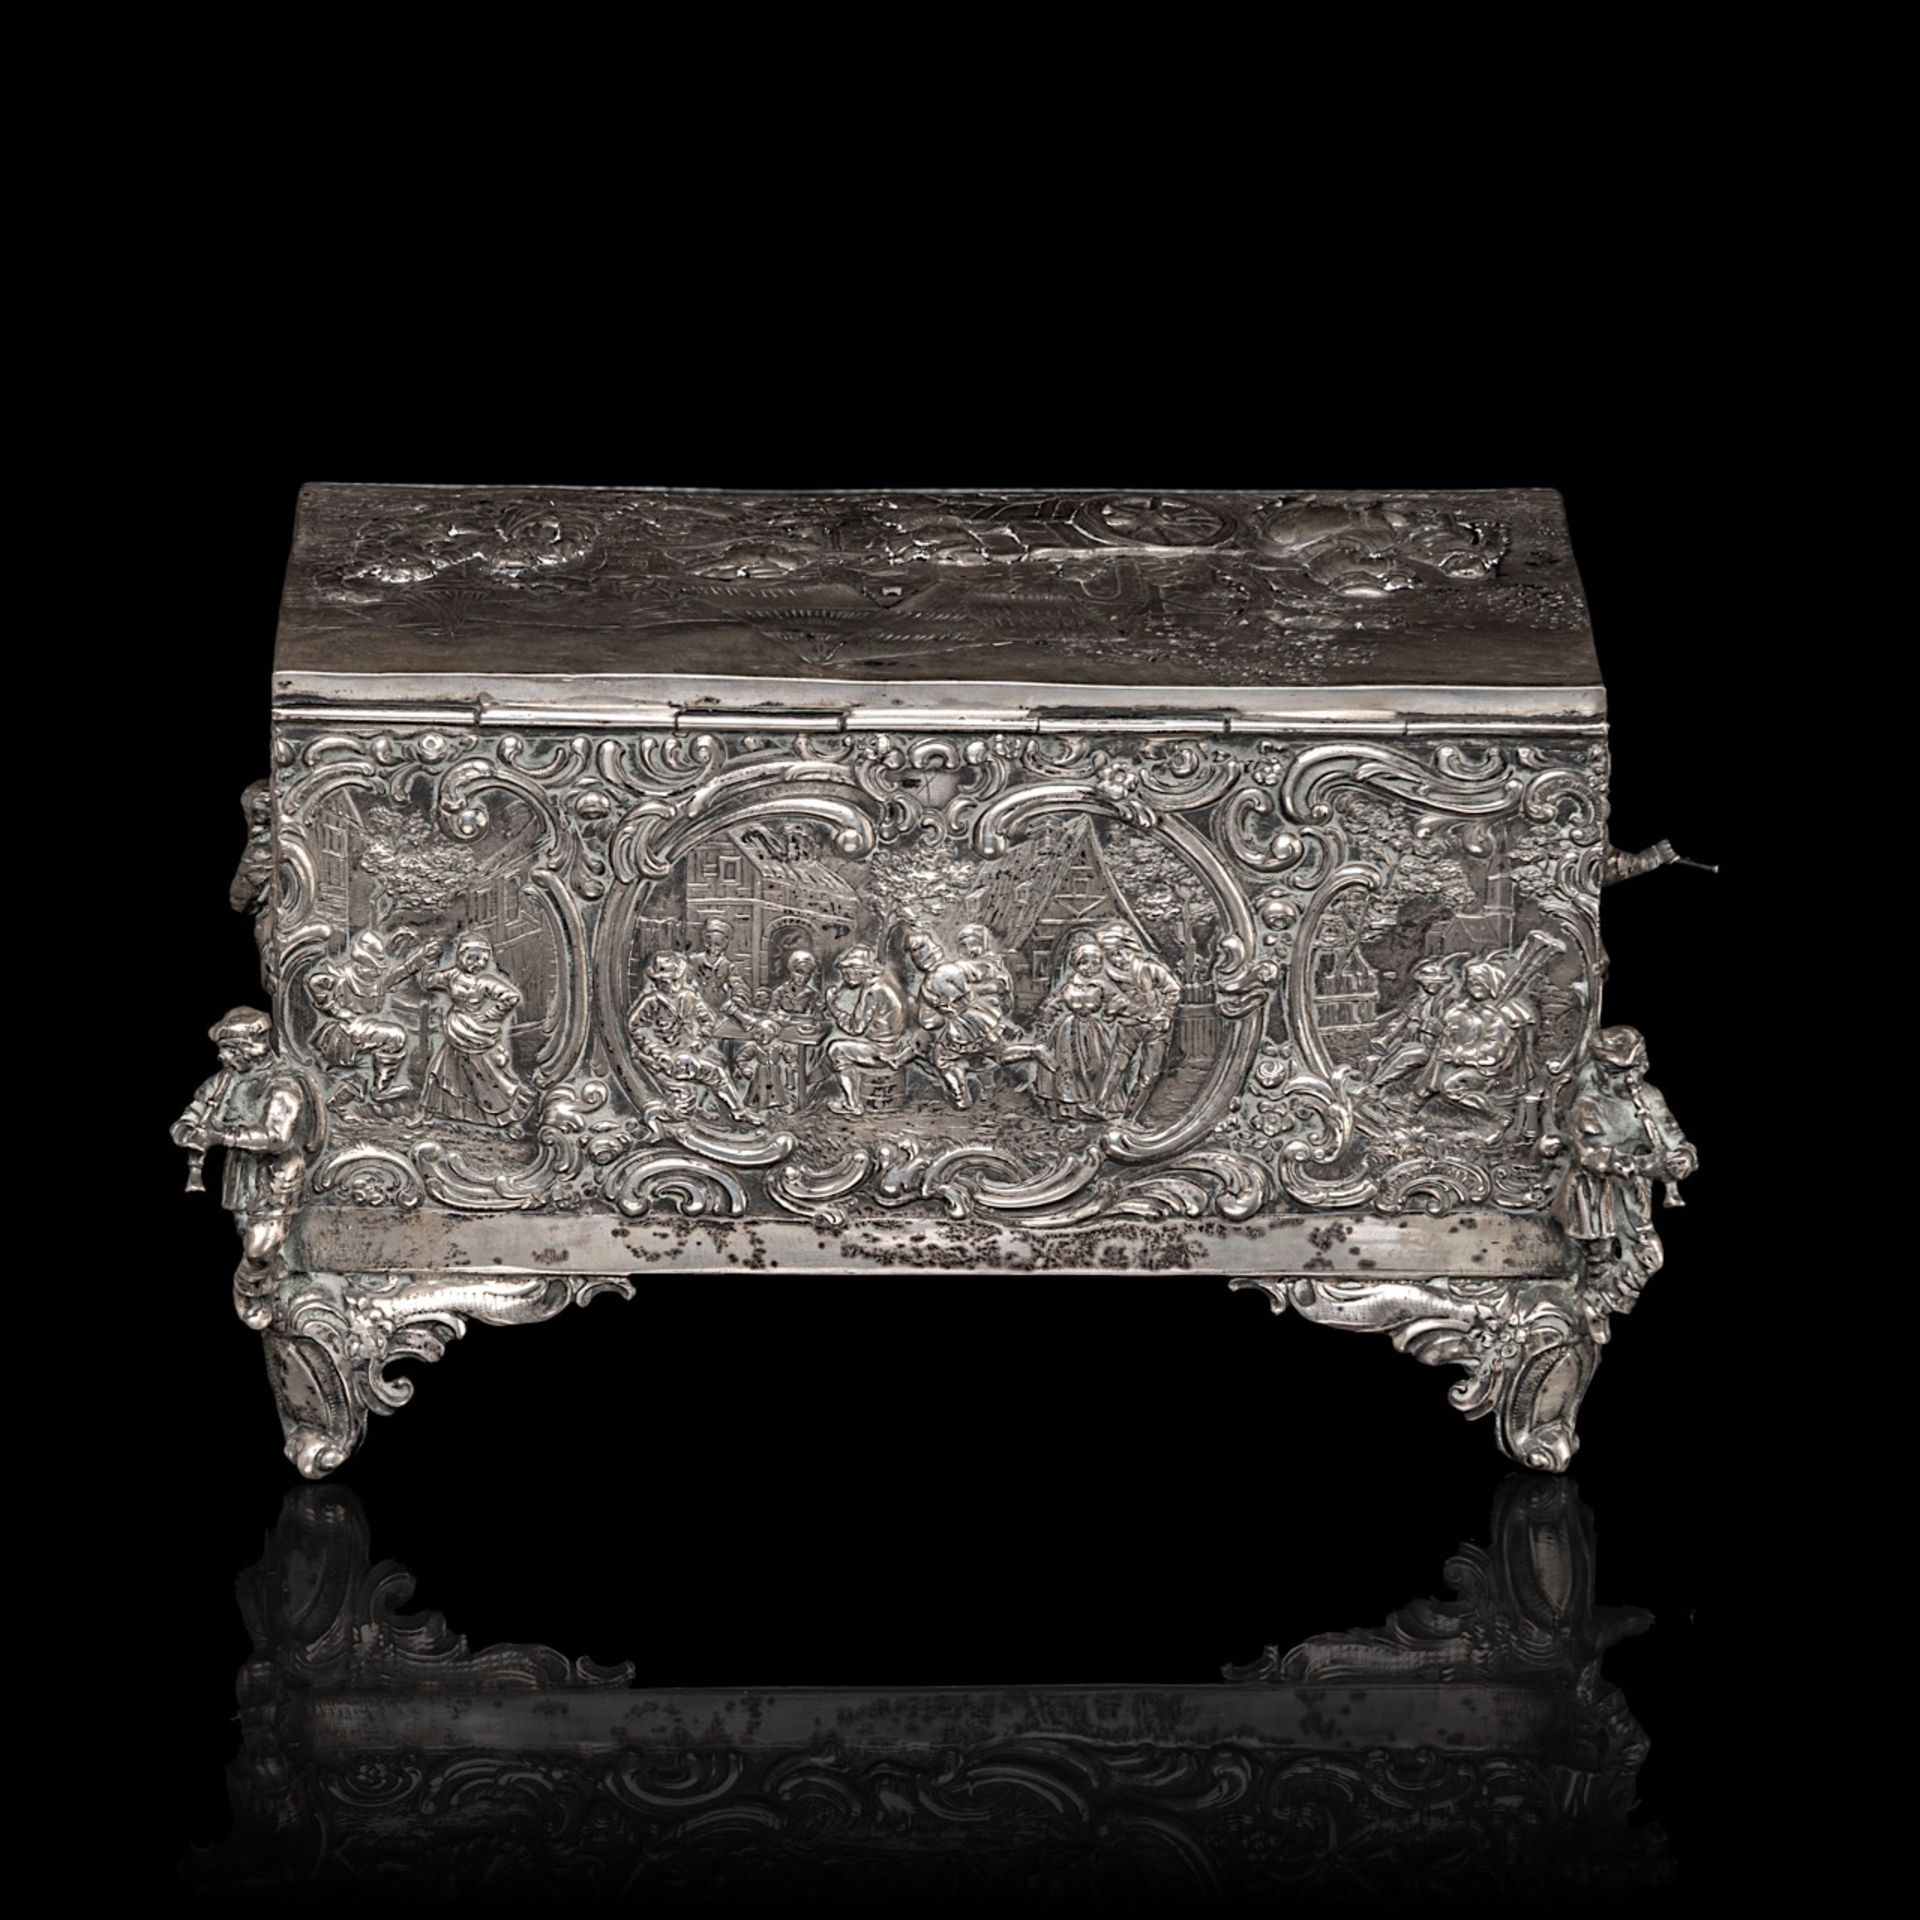 A Baroque Revival German silver jewellery casket, (1888-present), 800/000, weight ca: 1312 g 14.5 x - Image 4 of 9